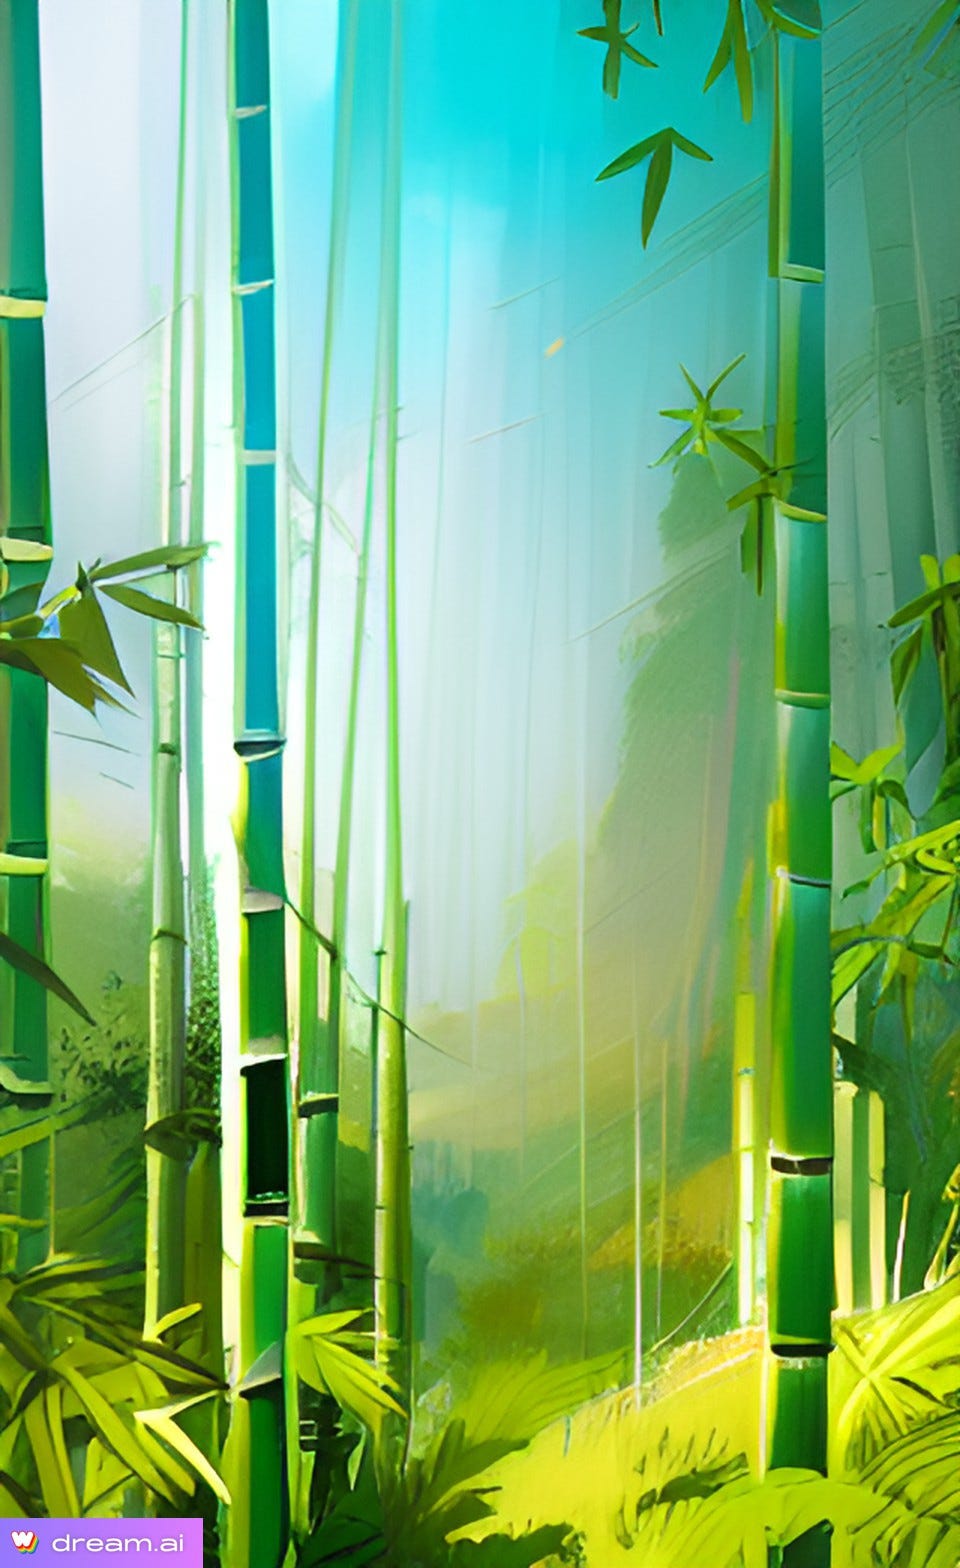 another misty bamboo forest